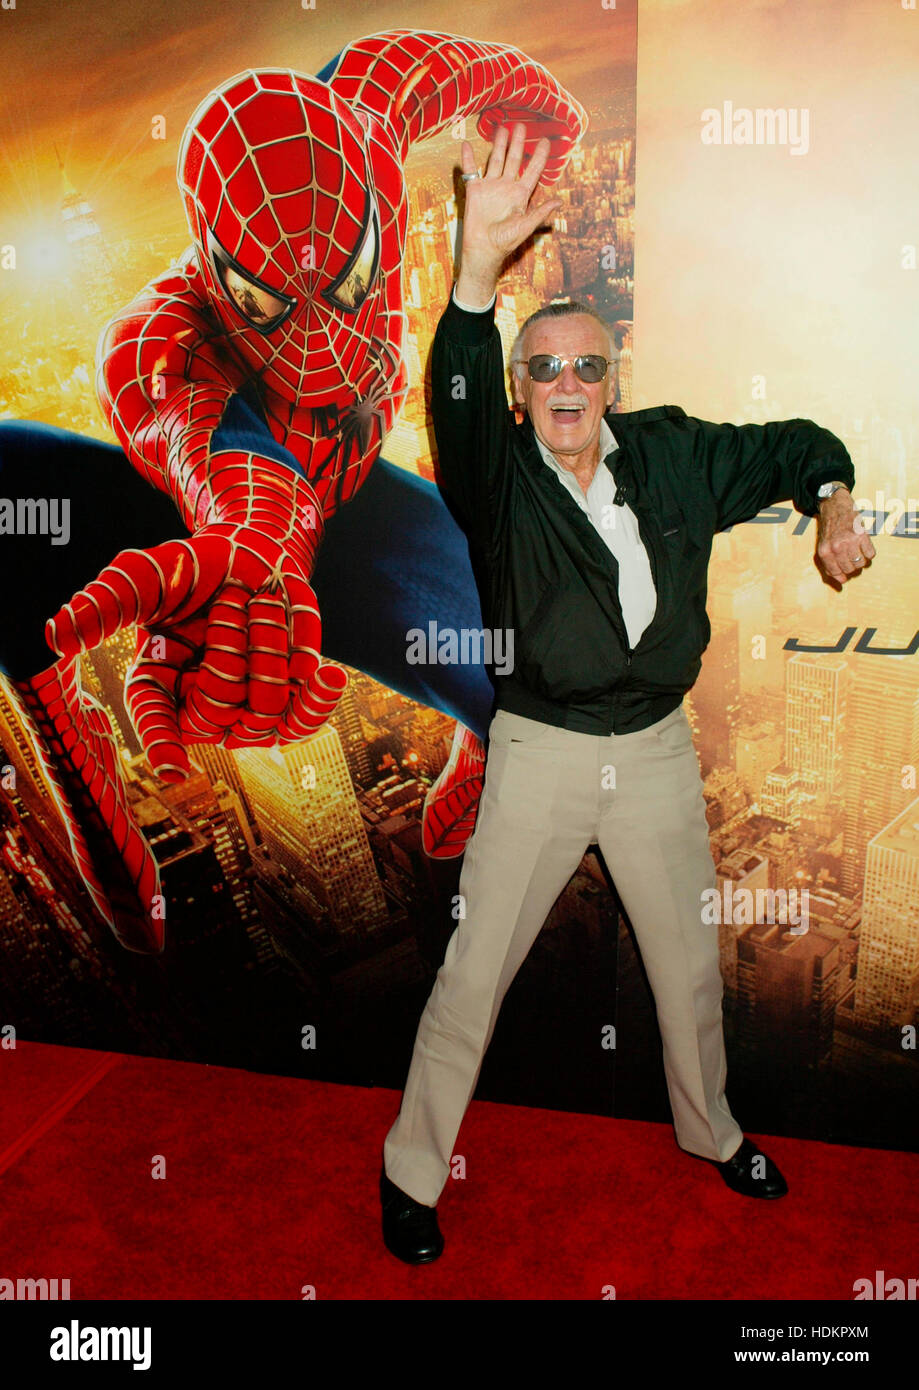 Spiderman creator Stan Lee at the premiere for the Columbia Pictures film, " Spider-man 2" at the Mann Village theatre in Westwood section of Los  Angeles, California on June 22, 2004. Photo credit: